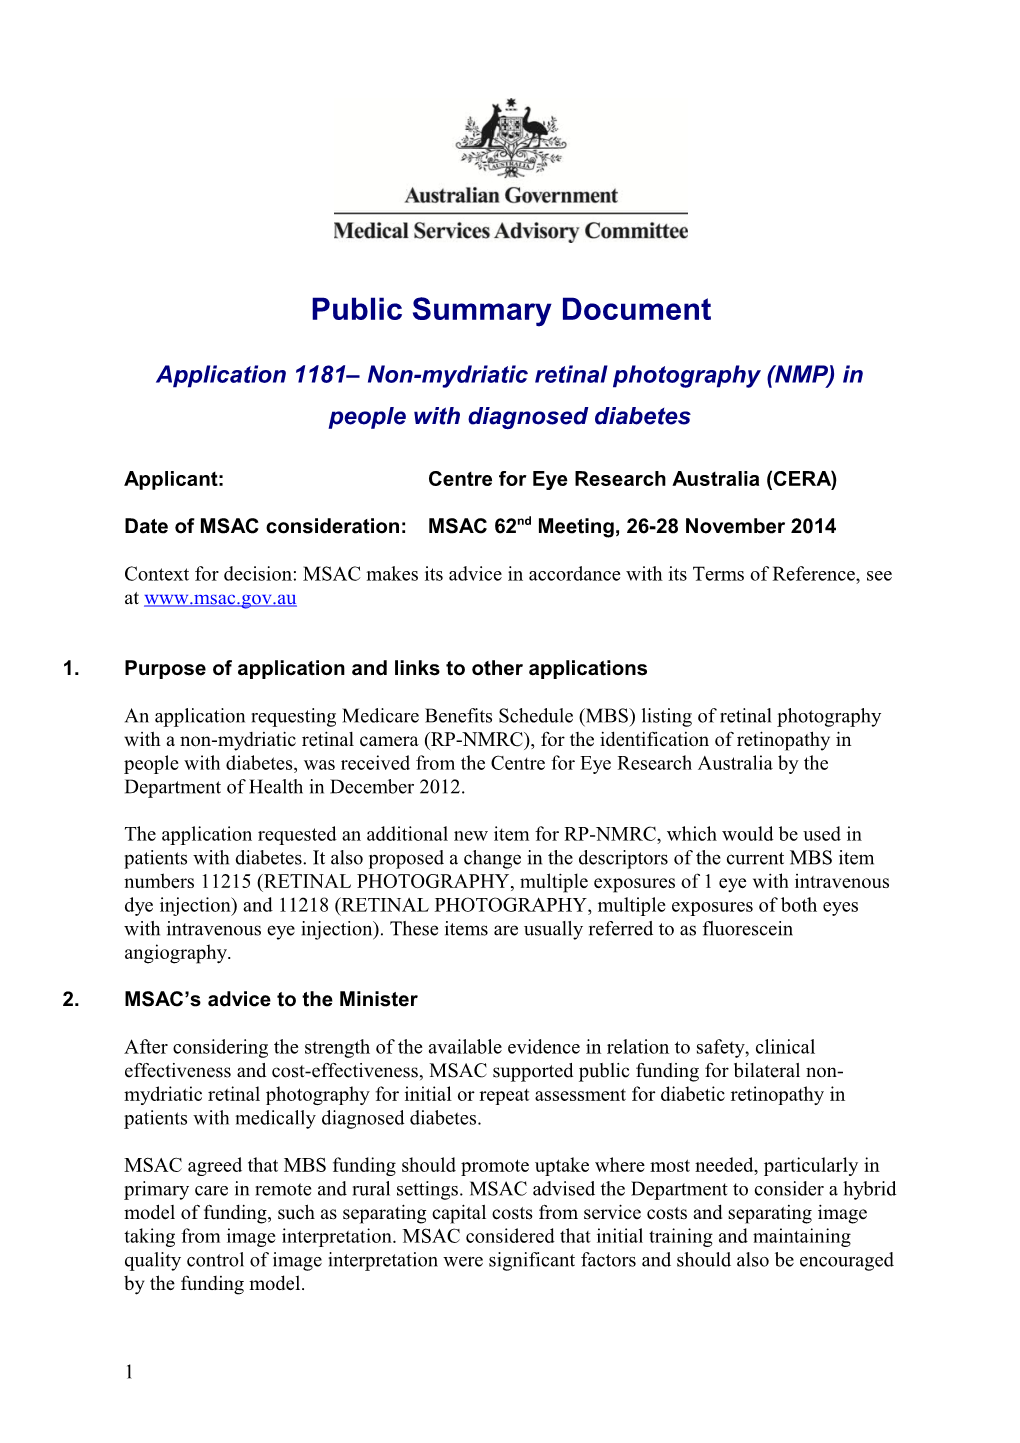 Application 1181 Non-Mydriatic Retinal Photography (NMP) in People with Diagnosed Diabetes